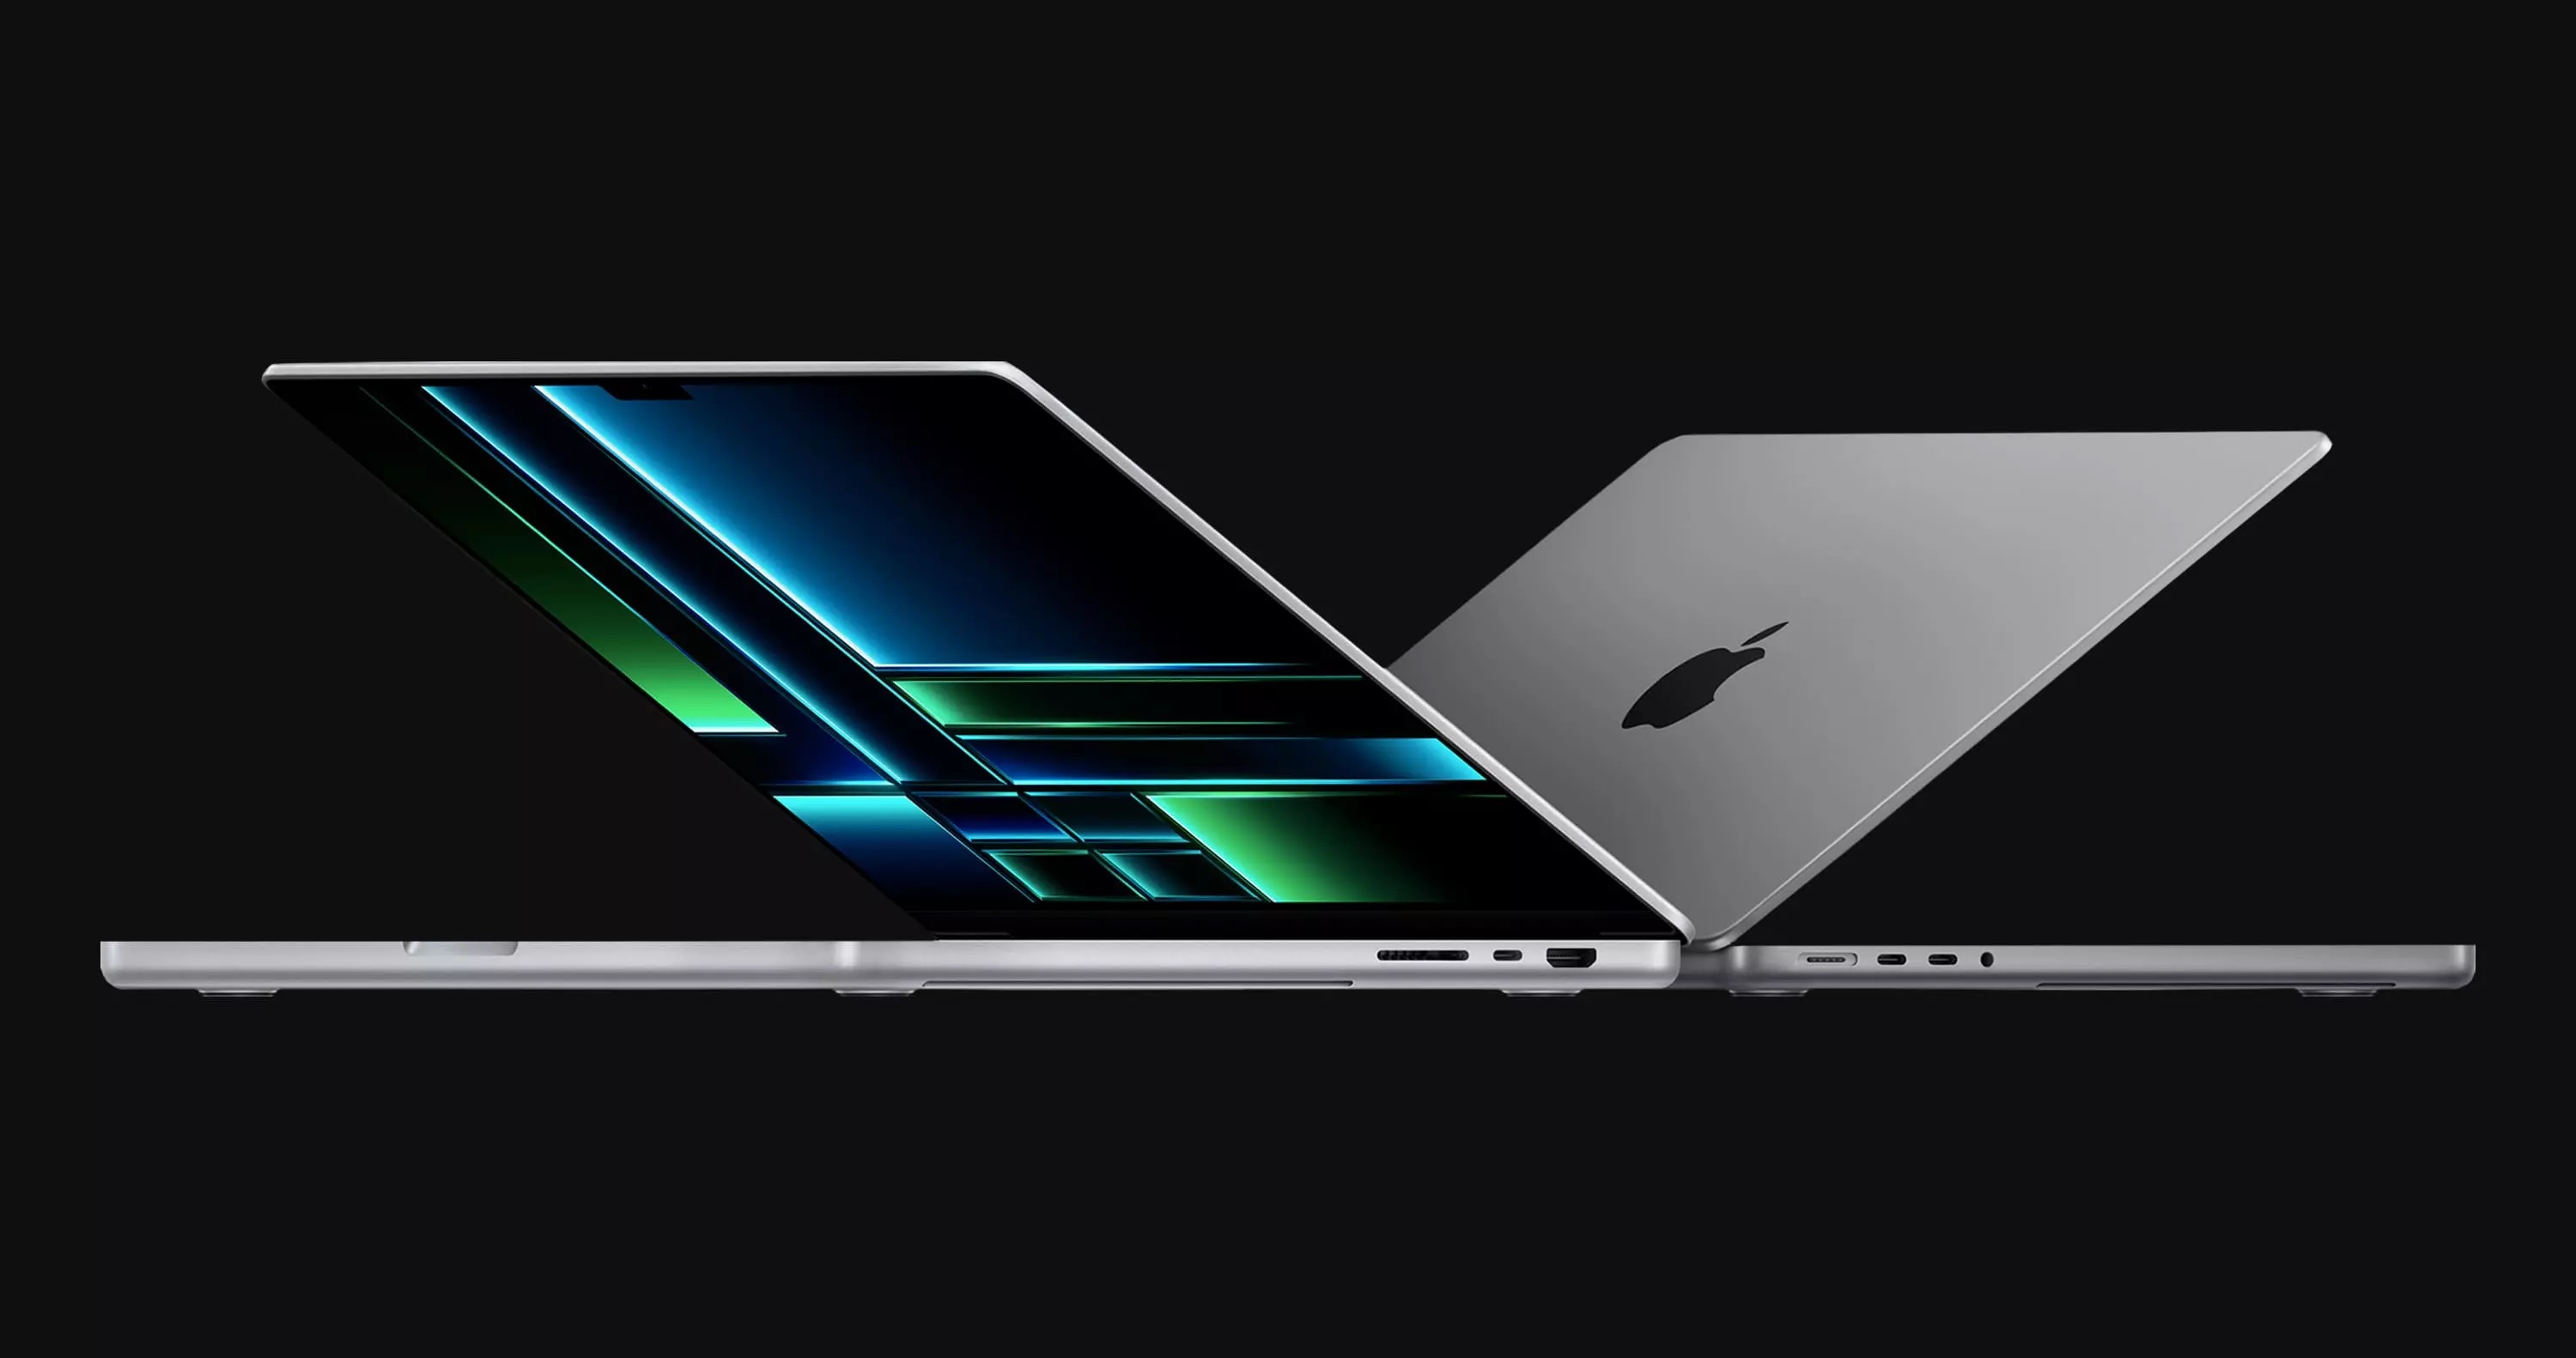 Apple won't show 13-inch MacBook Pro with M3 processor at Scary Fast presentation - Bloomberg